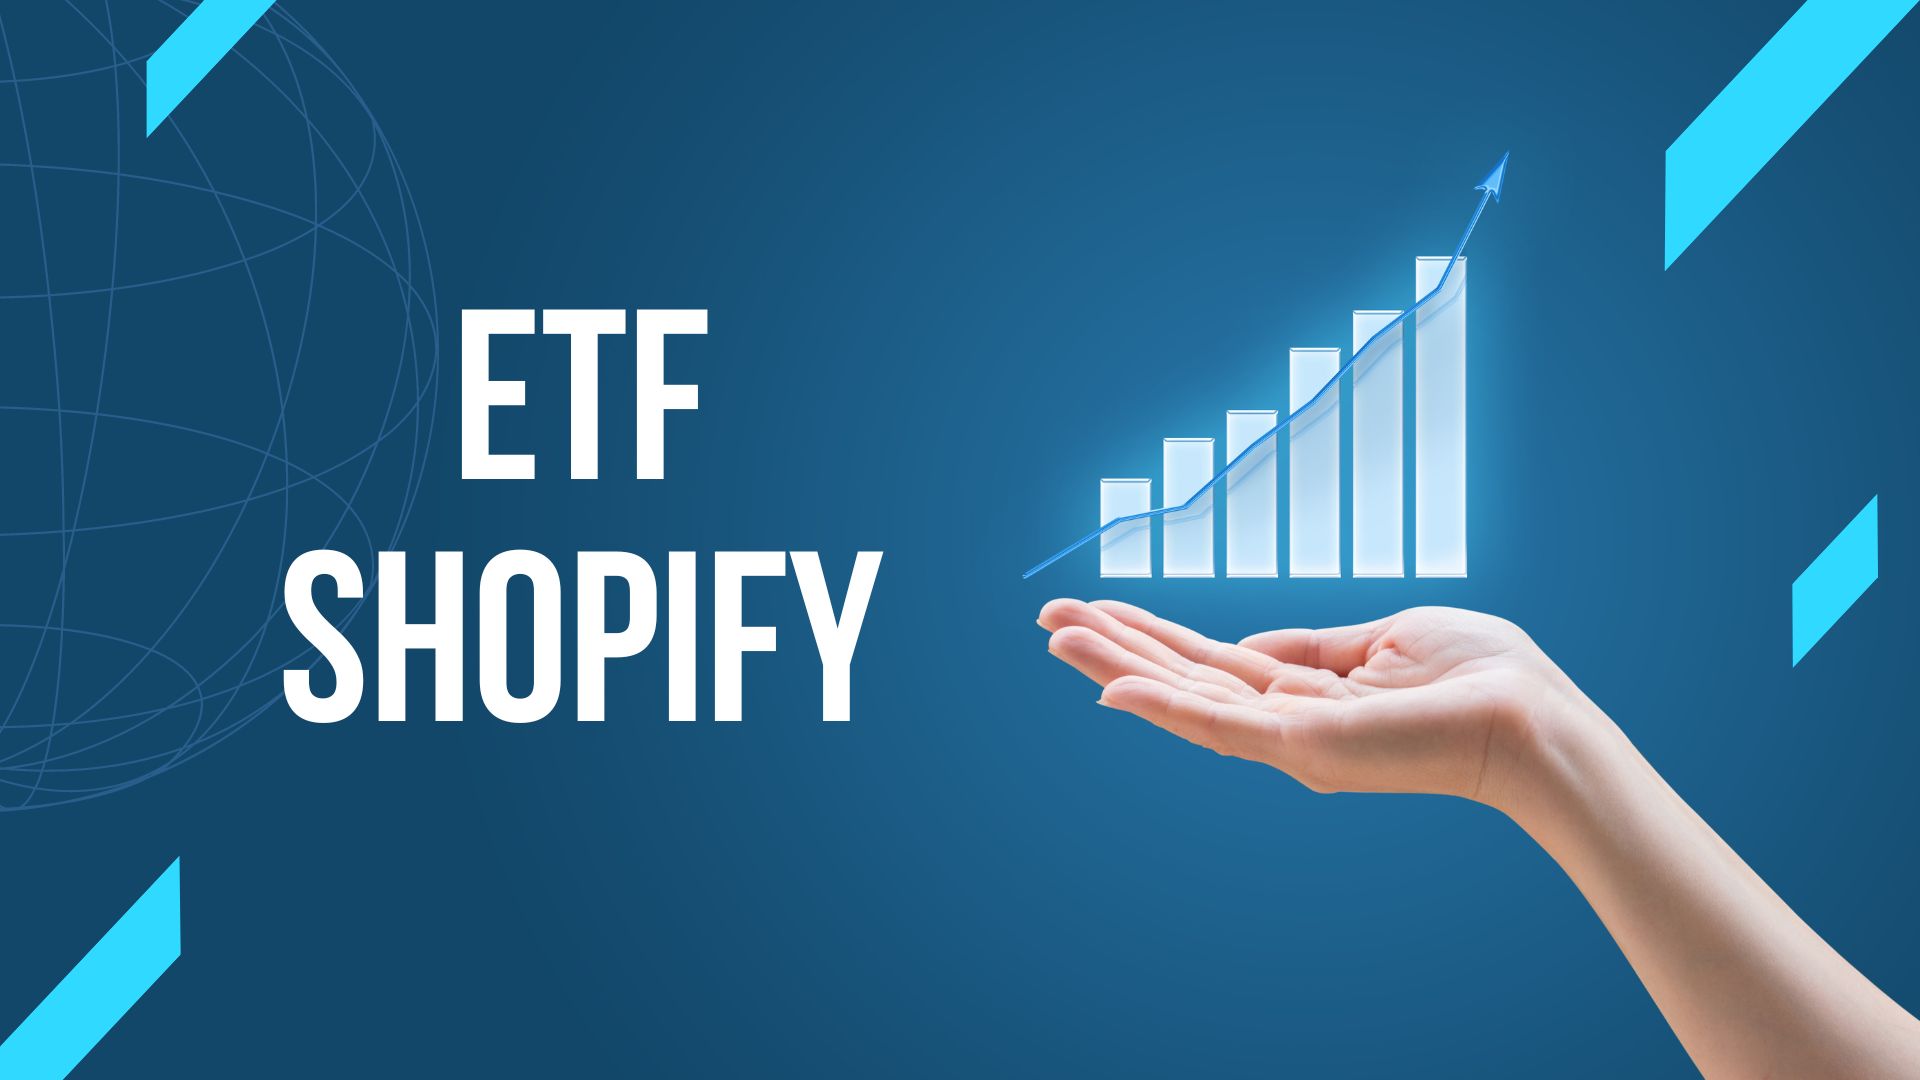 Which ETF Has Shopify